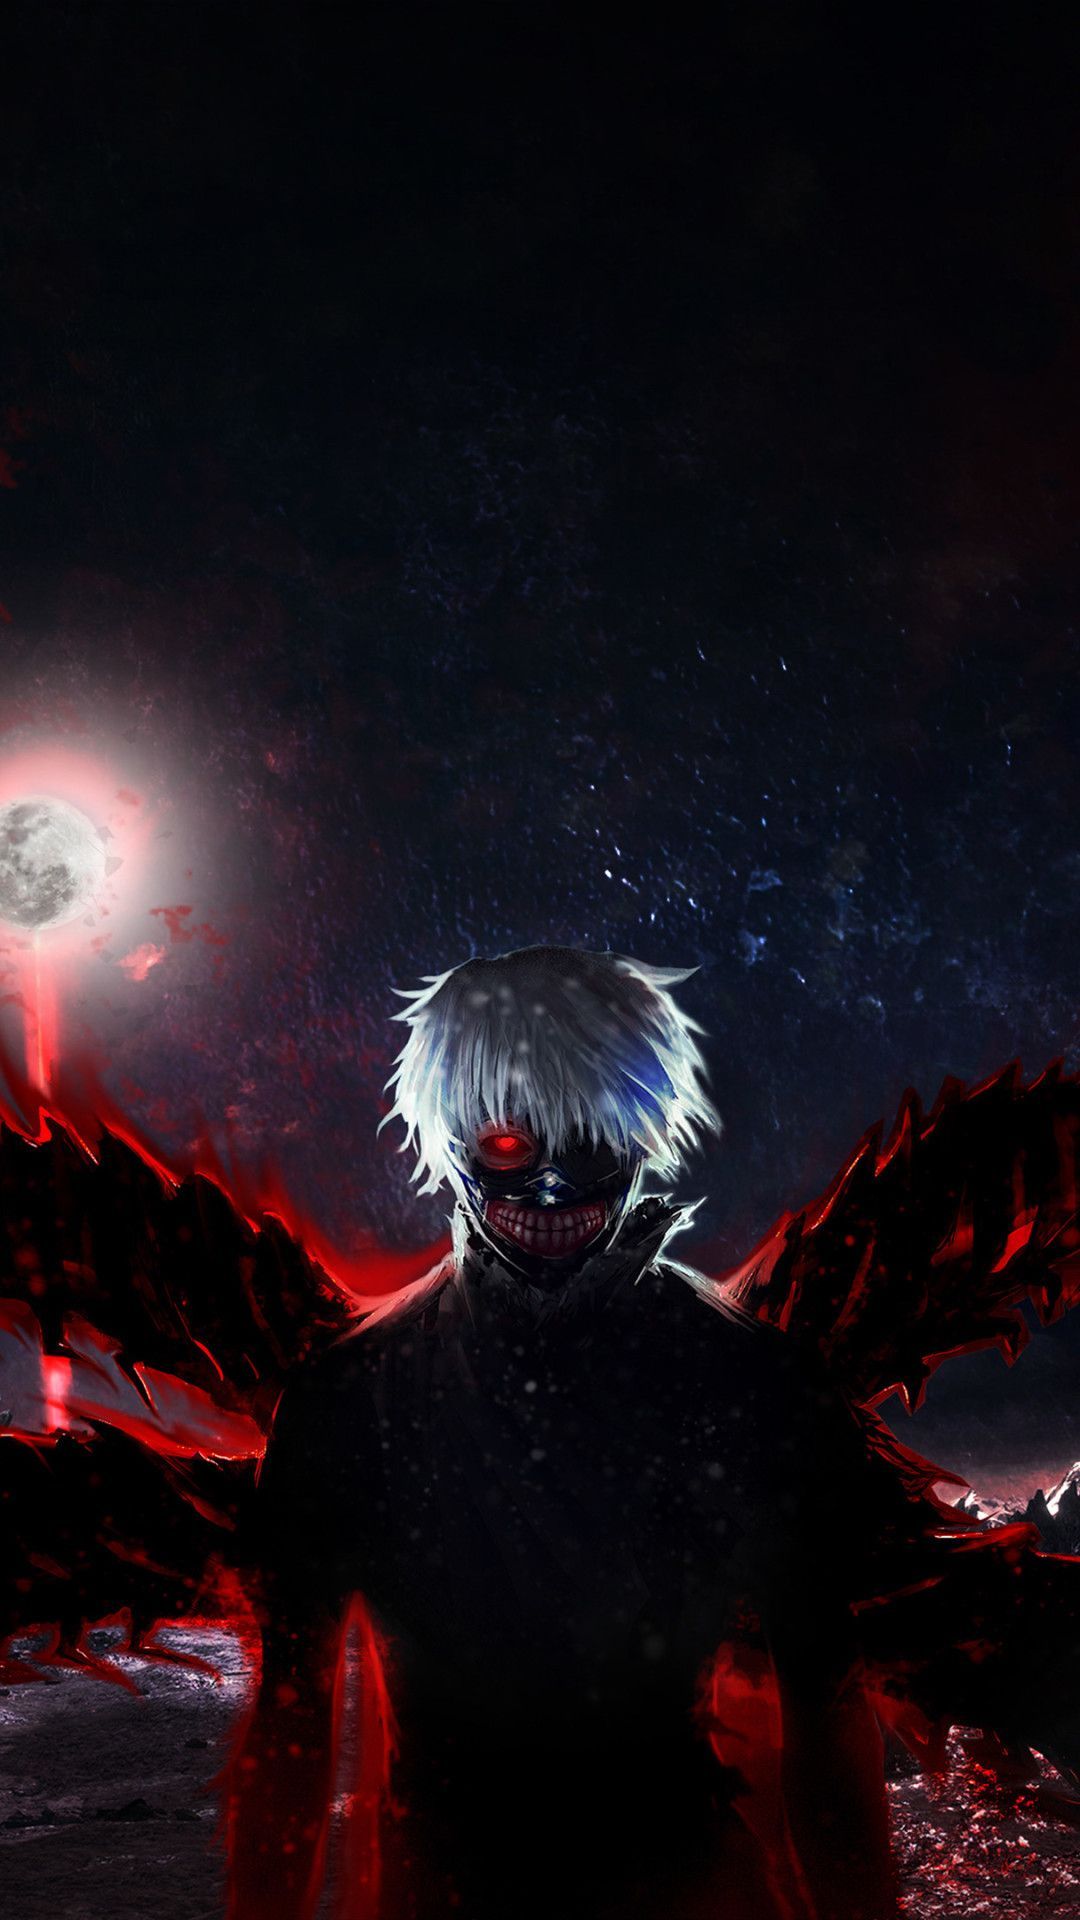 Tokyo Ghoul 4k Mobile Wallpaper (iPhone, Android, Samsung, Pixel, Xiaomi). Tokyo ghoul wallpaper, Tokyo ghoul manga, Tokyo ghoul anime